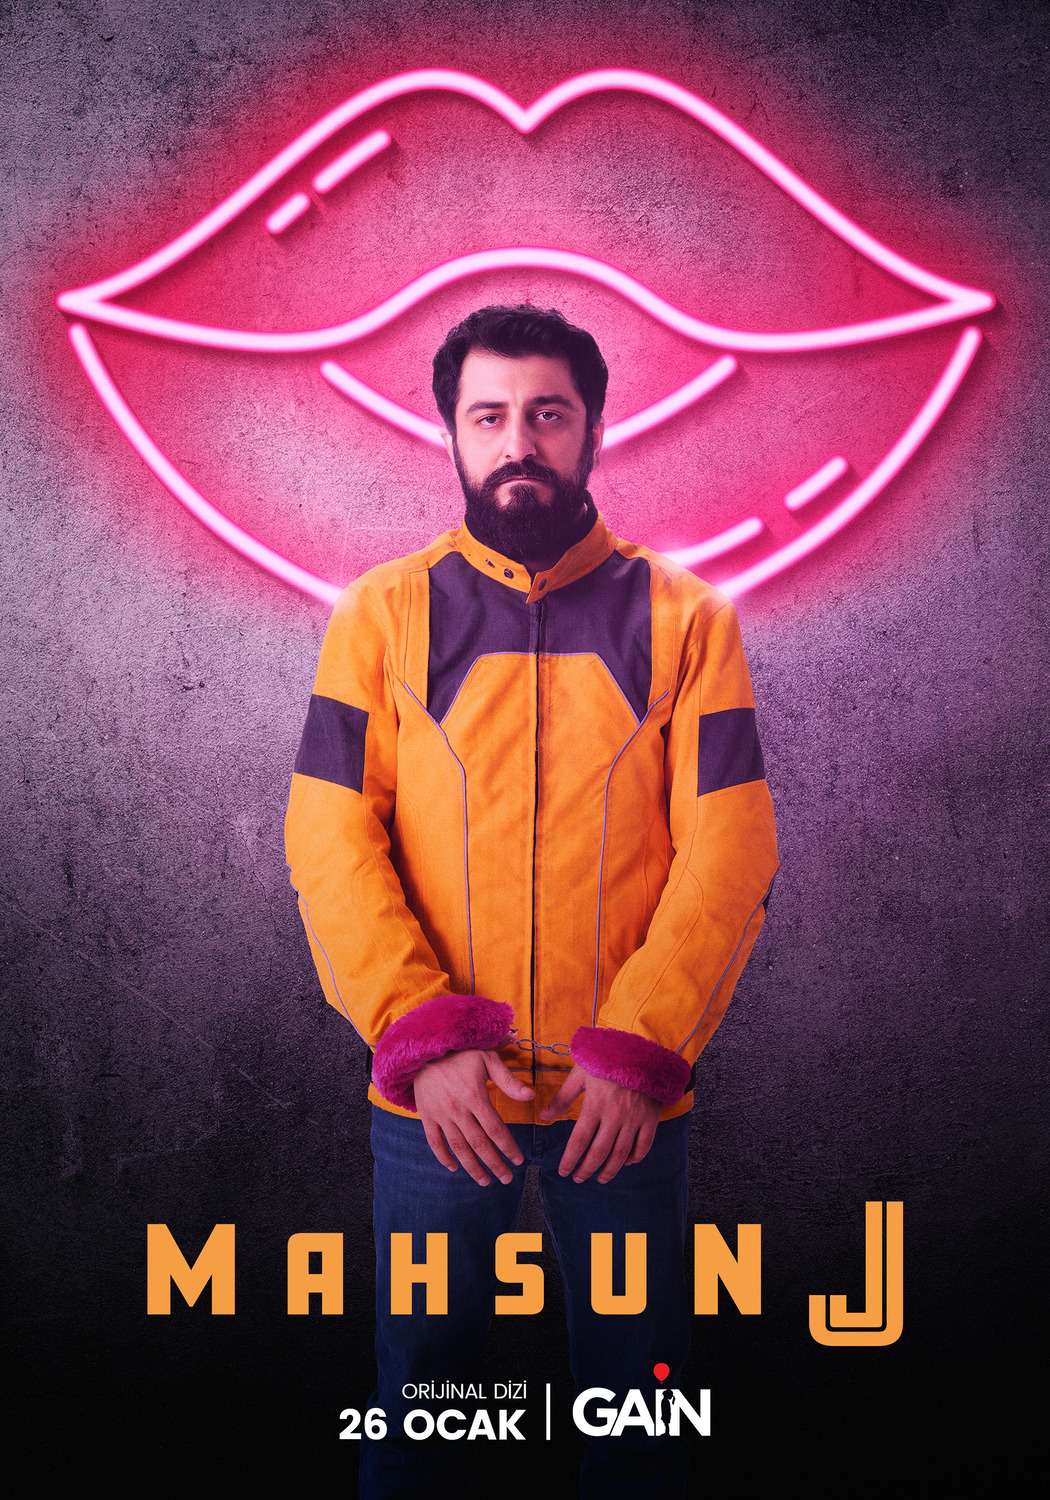 Extra Large TV Poster Image for Mahsun J 